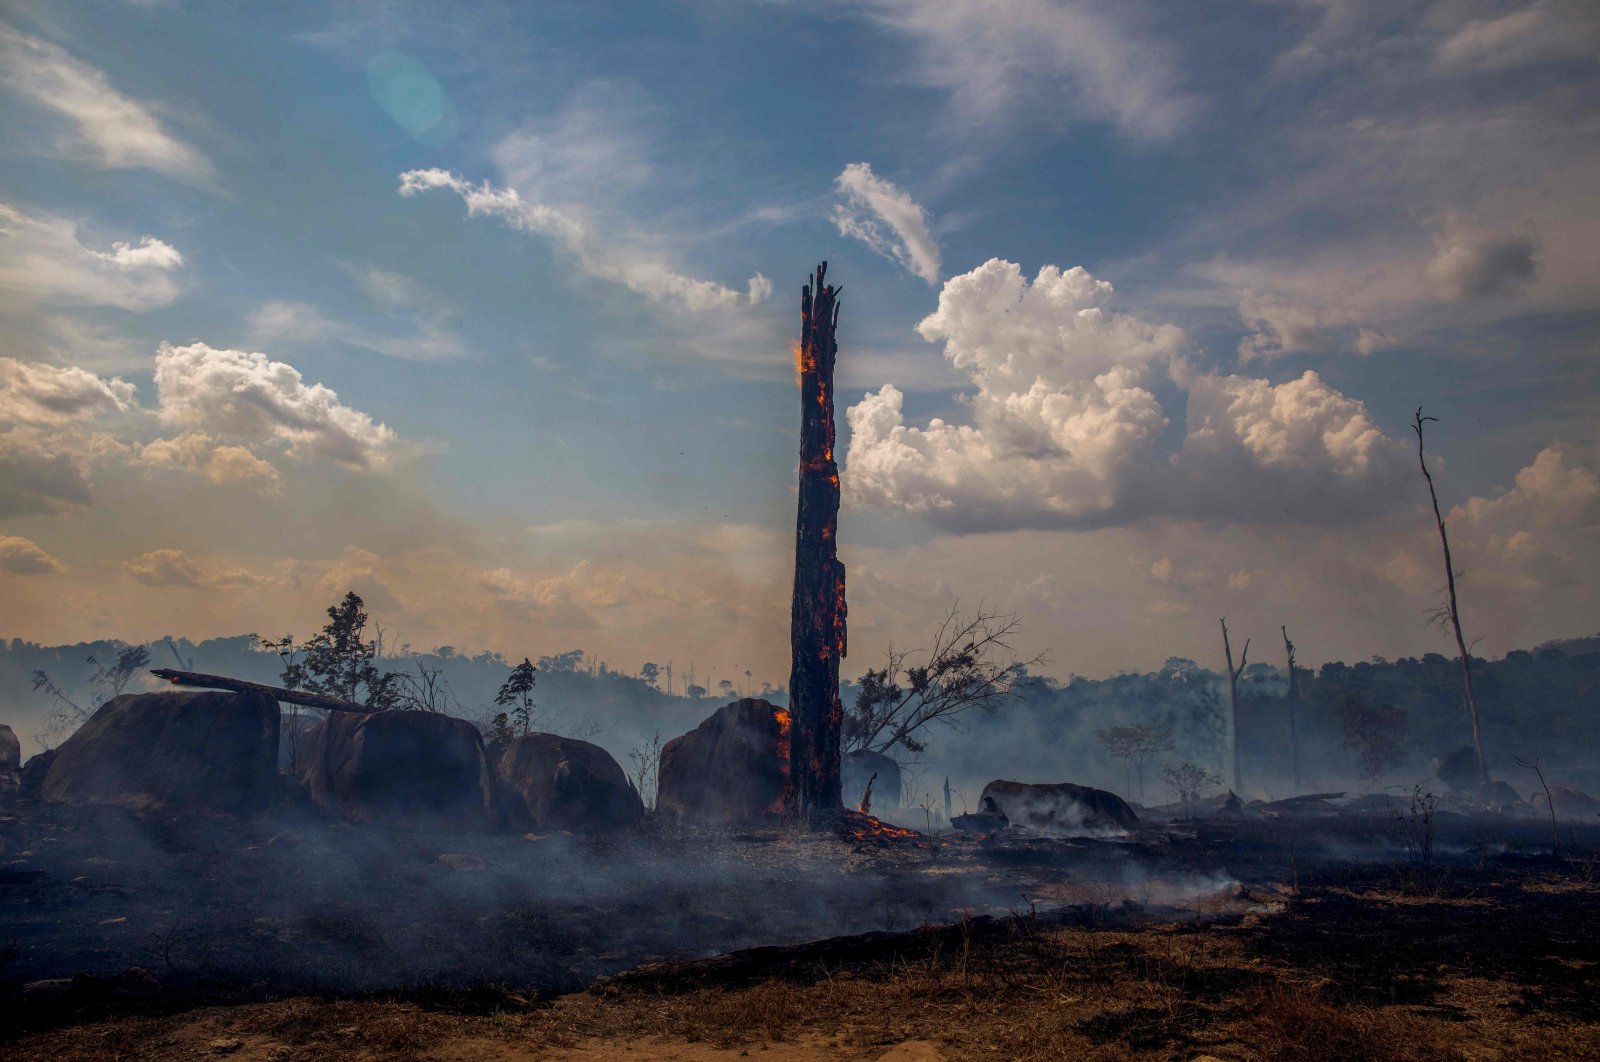 Amazon forest fires add to Latin America's coronavirus risks | Daily Sabah